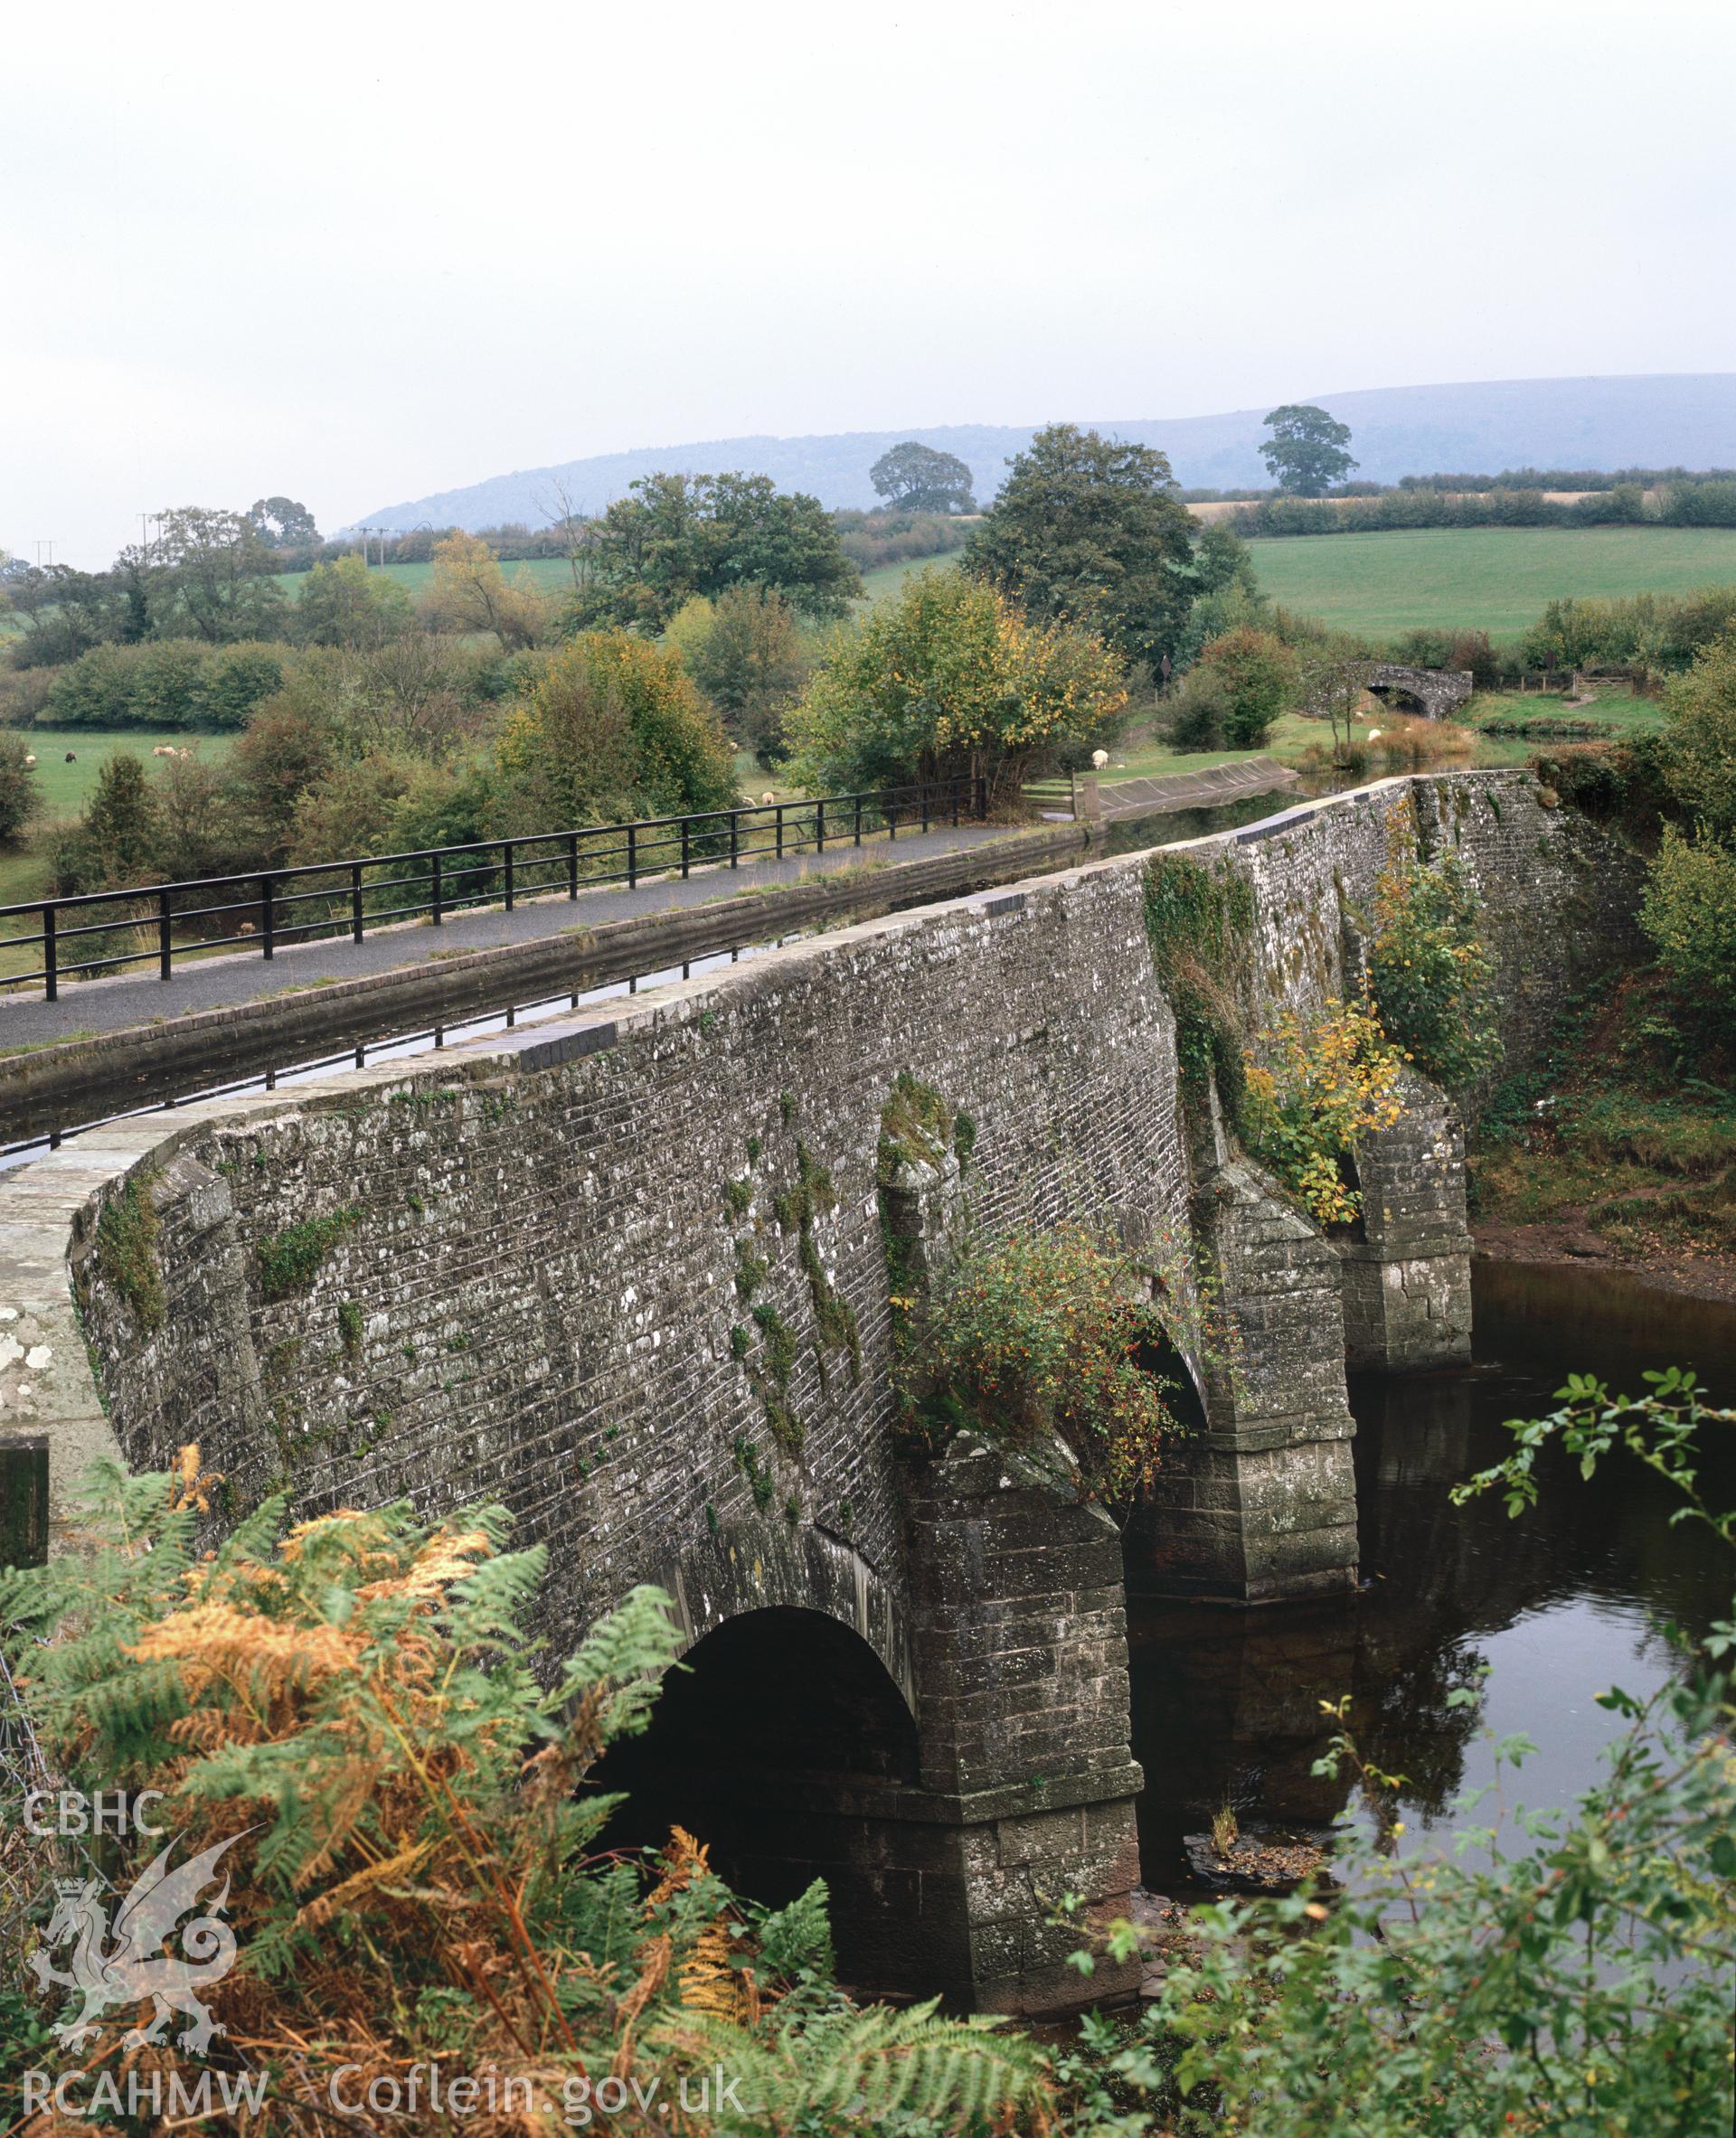 Colour transparency showing a view of Brynich Aqueduct, produced by Iain Wright 1990